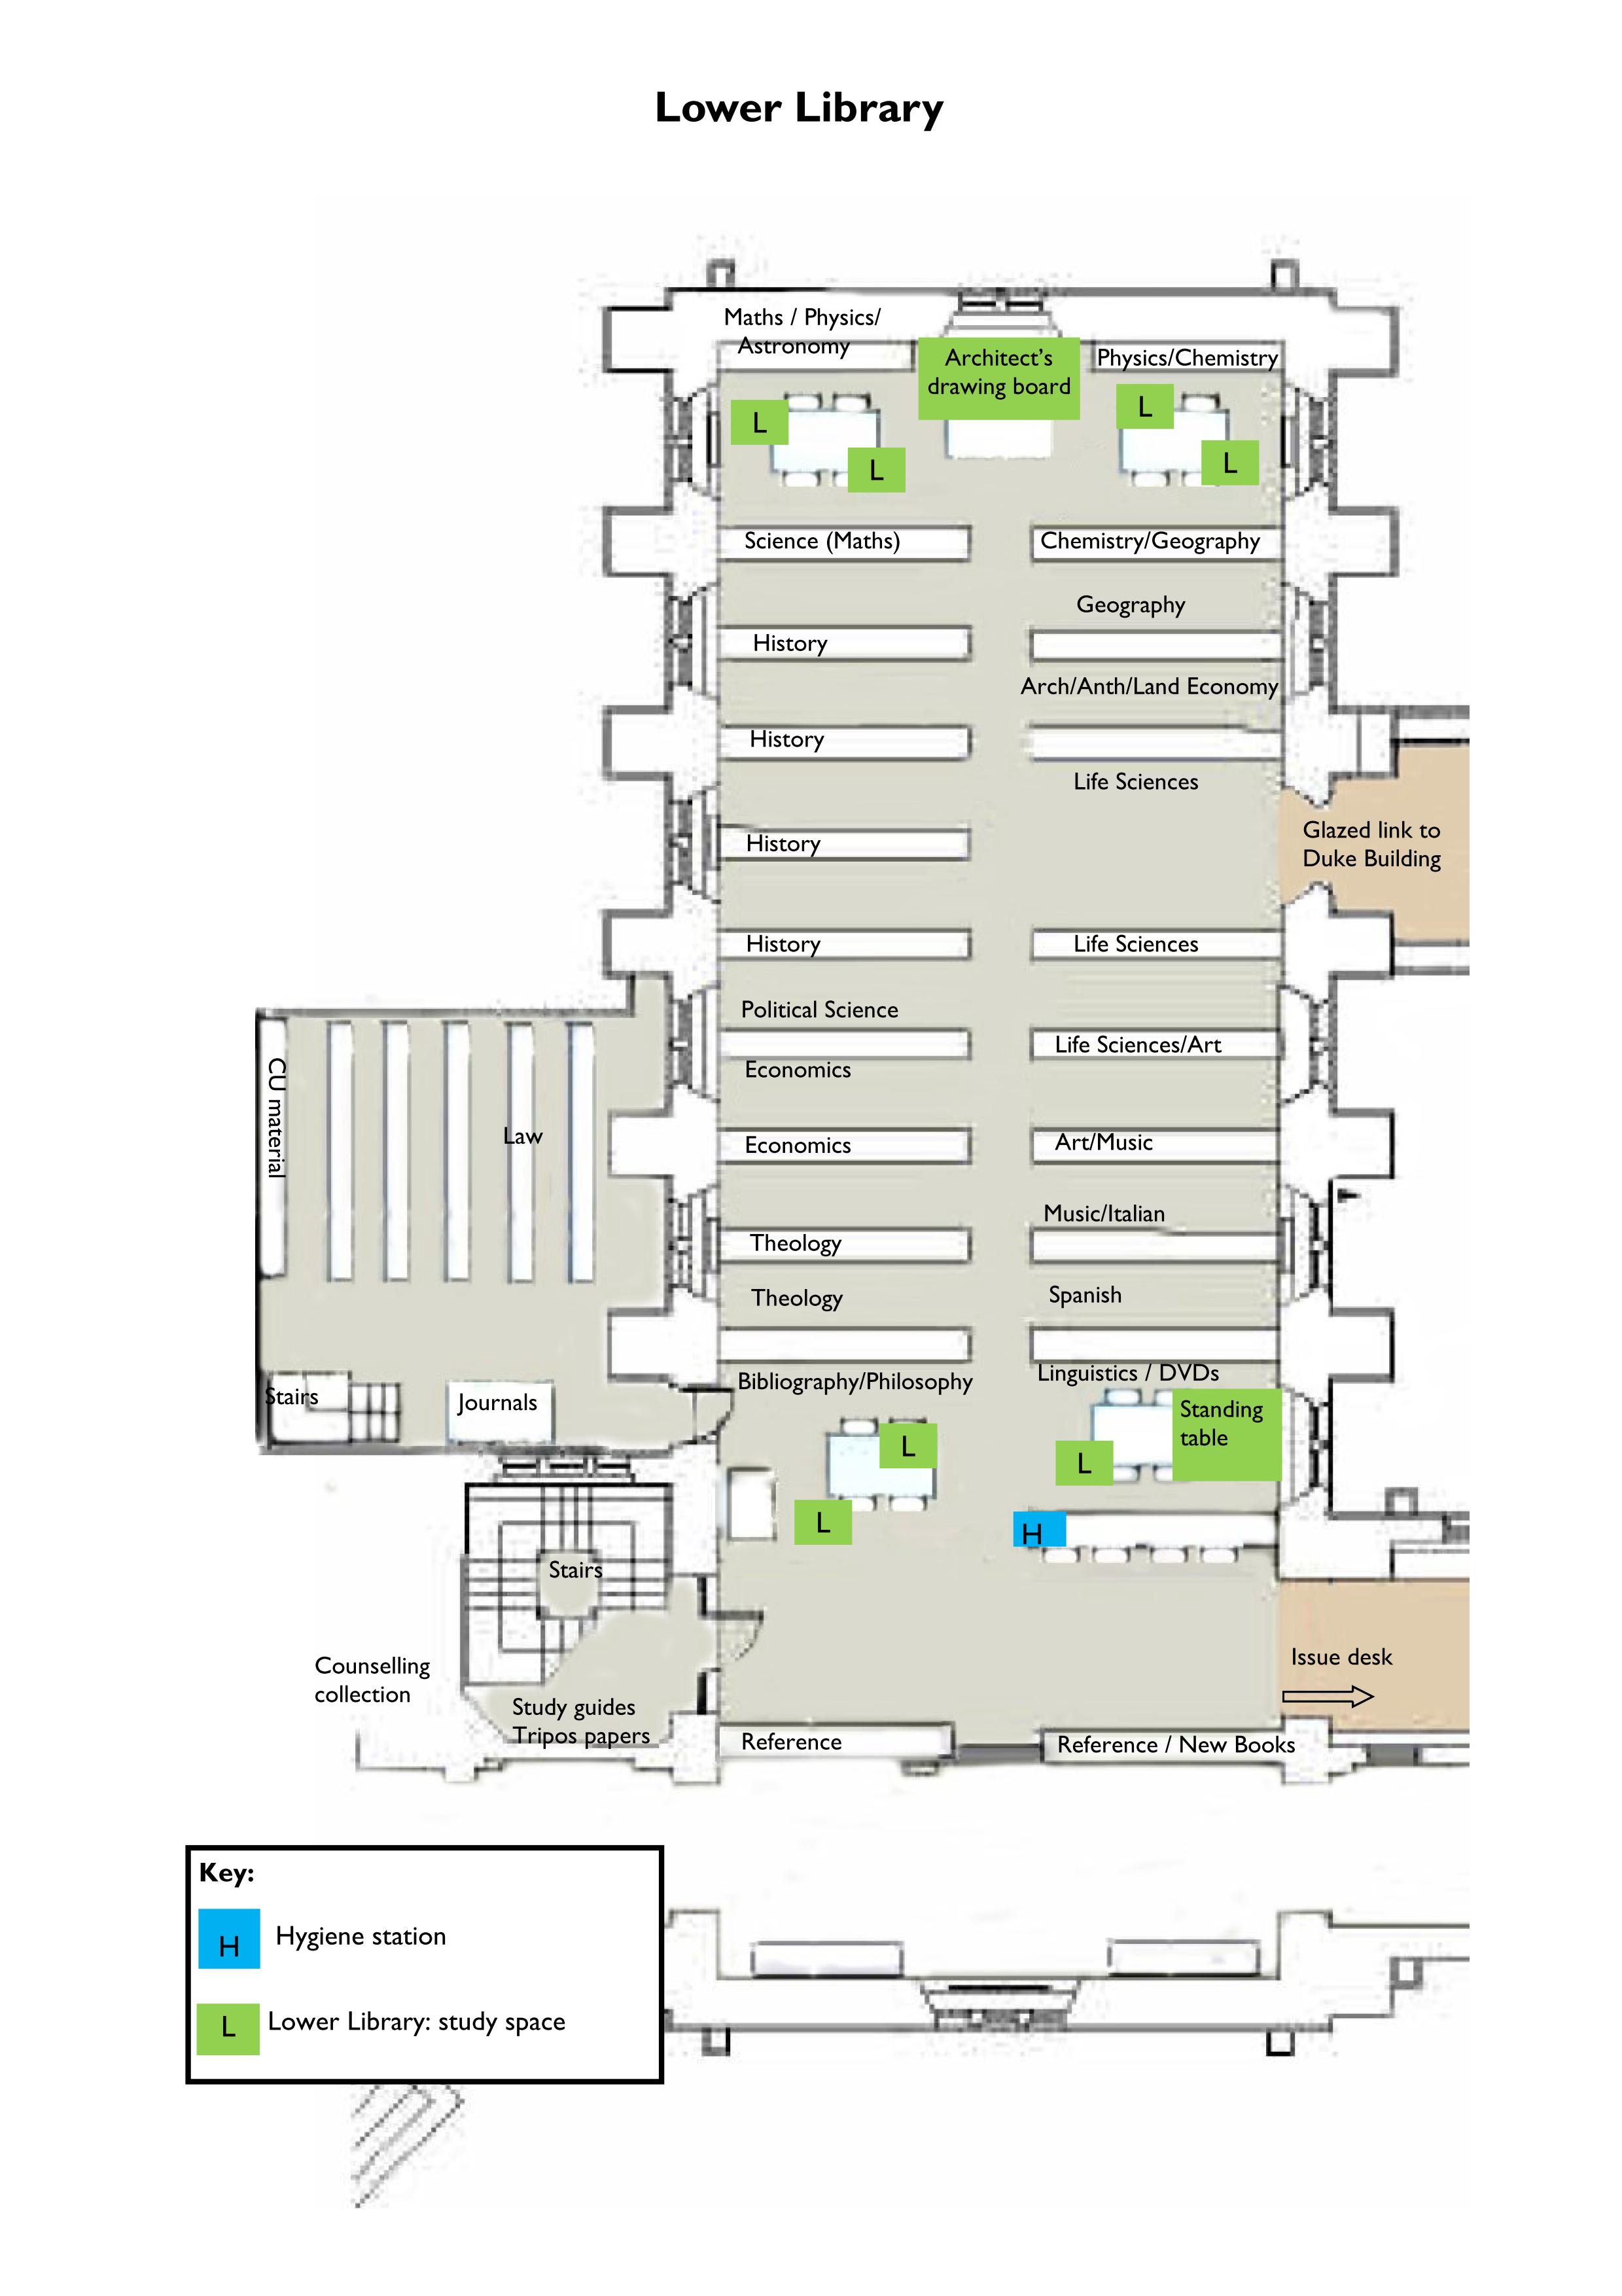 Floor plan of the Lower Library showing study spaces